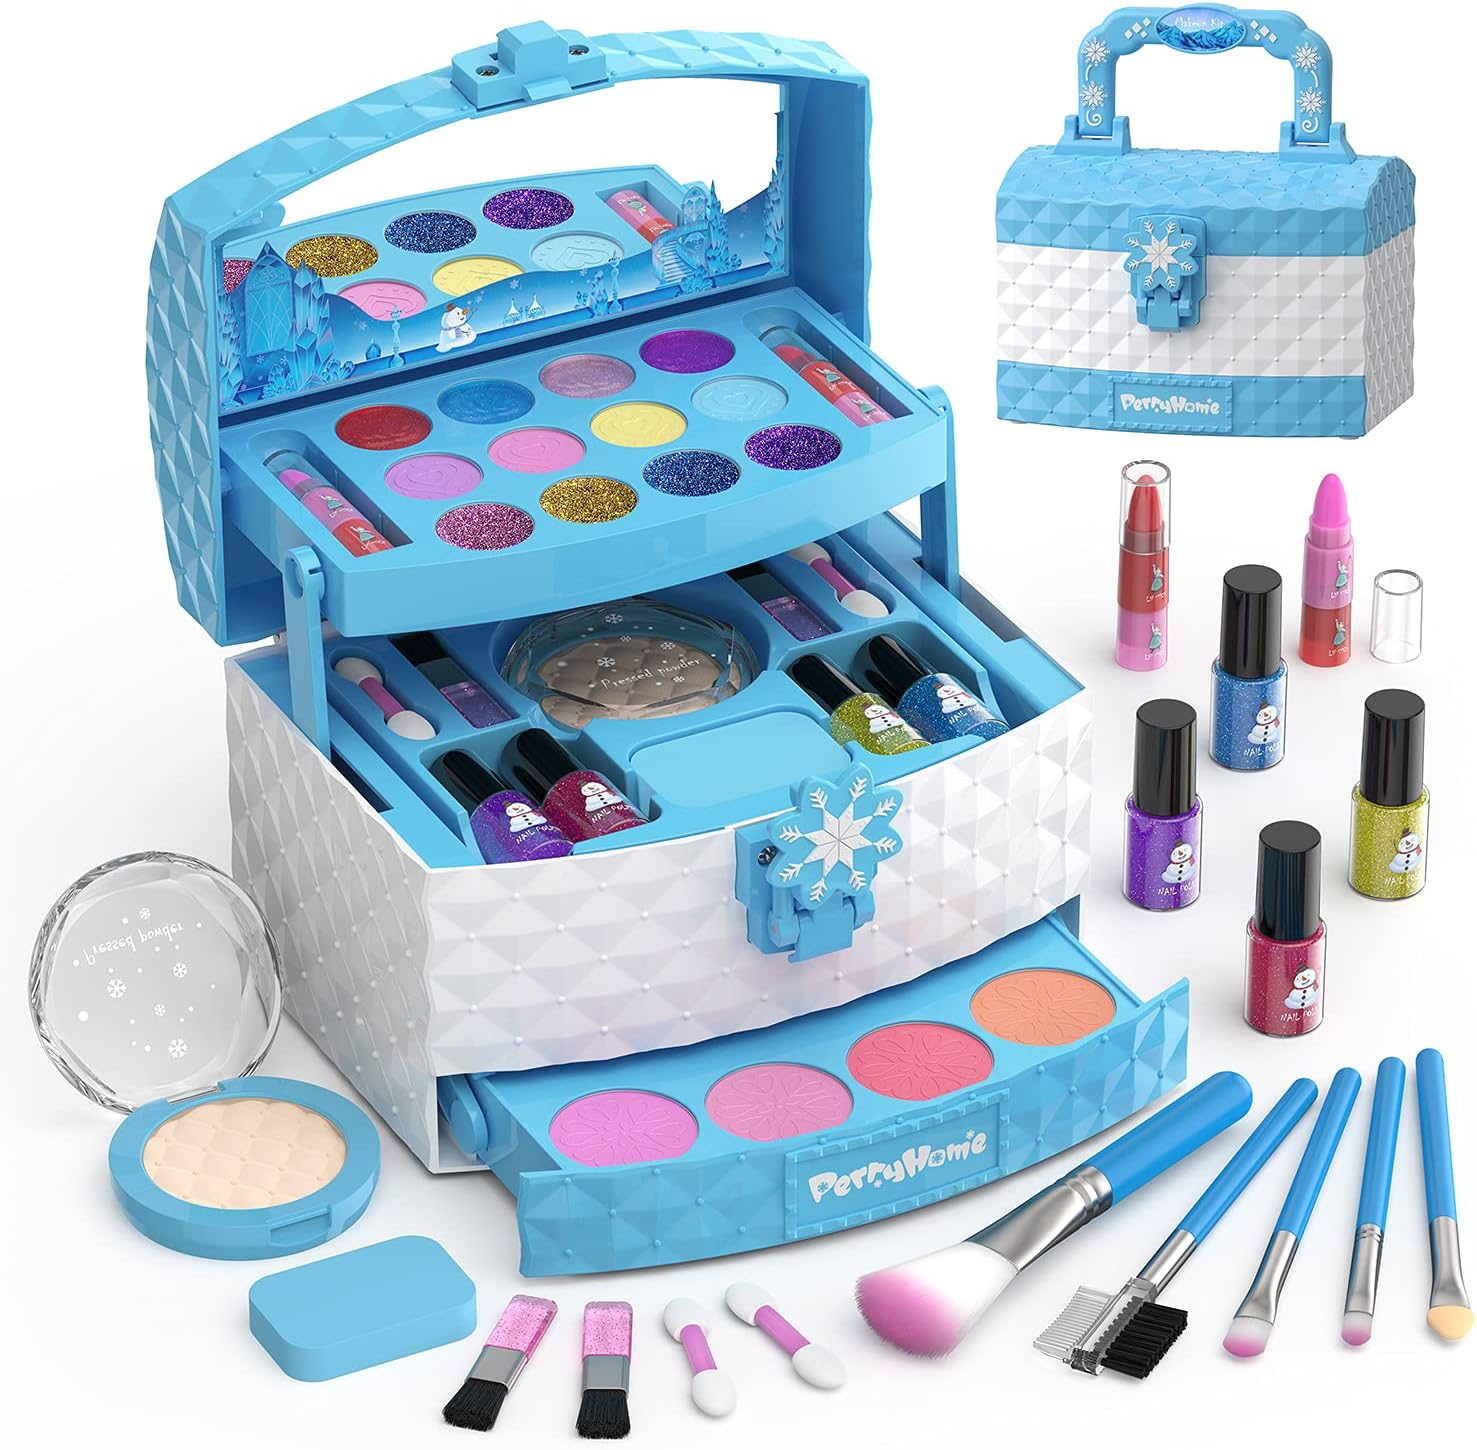 Kids Makeup Kit for Girl 35 Pcs Washable Real Cosmetic, Safe & Non-Toxic Little Girl Makeup Set